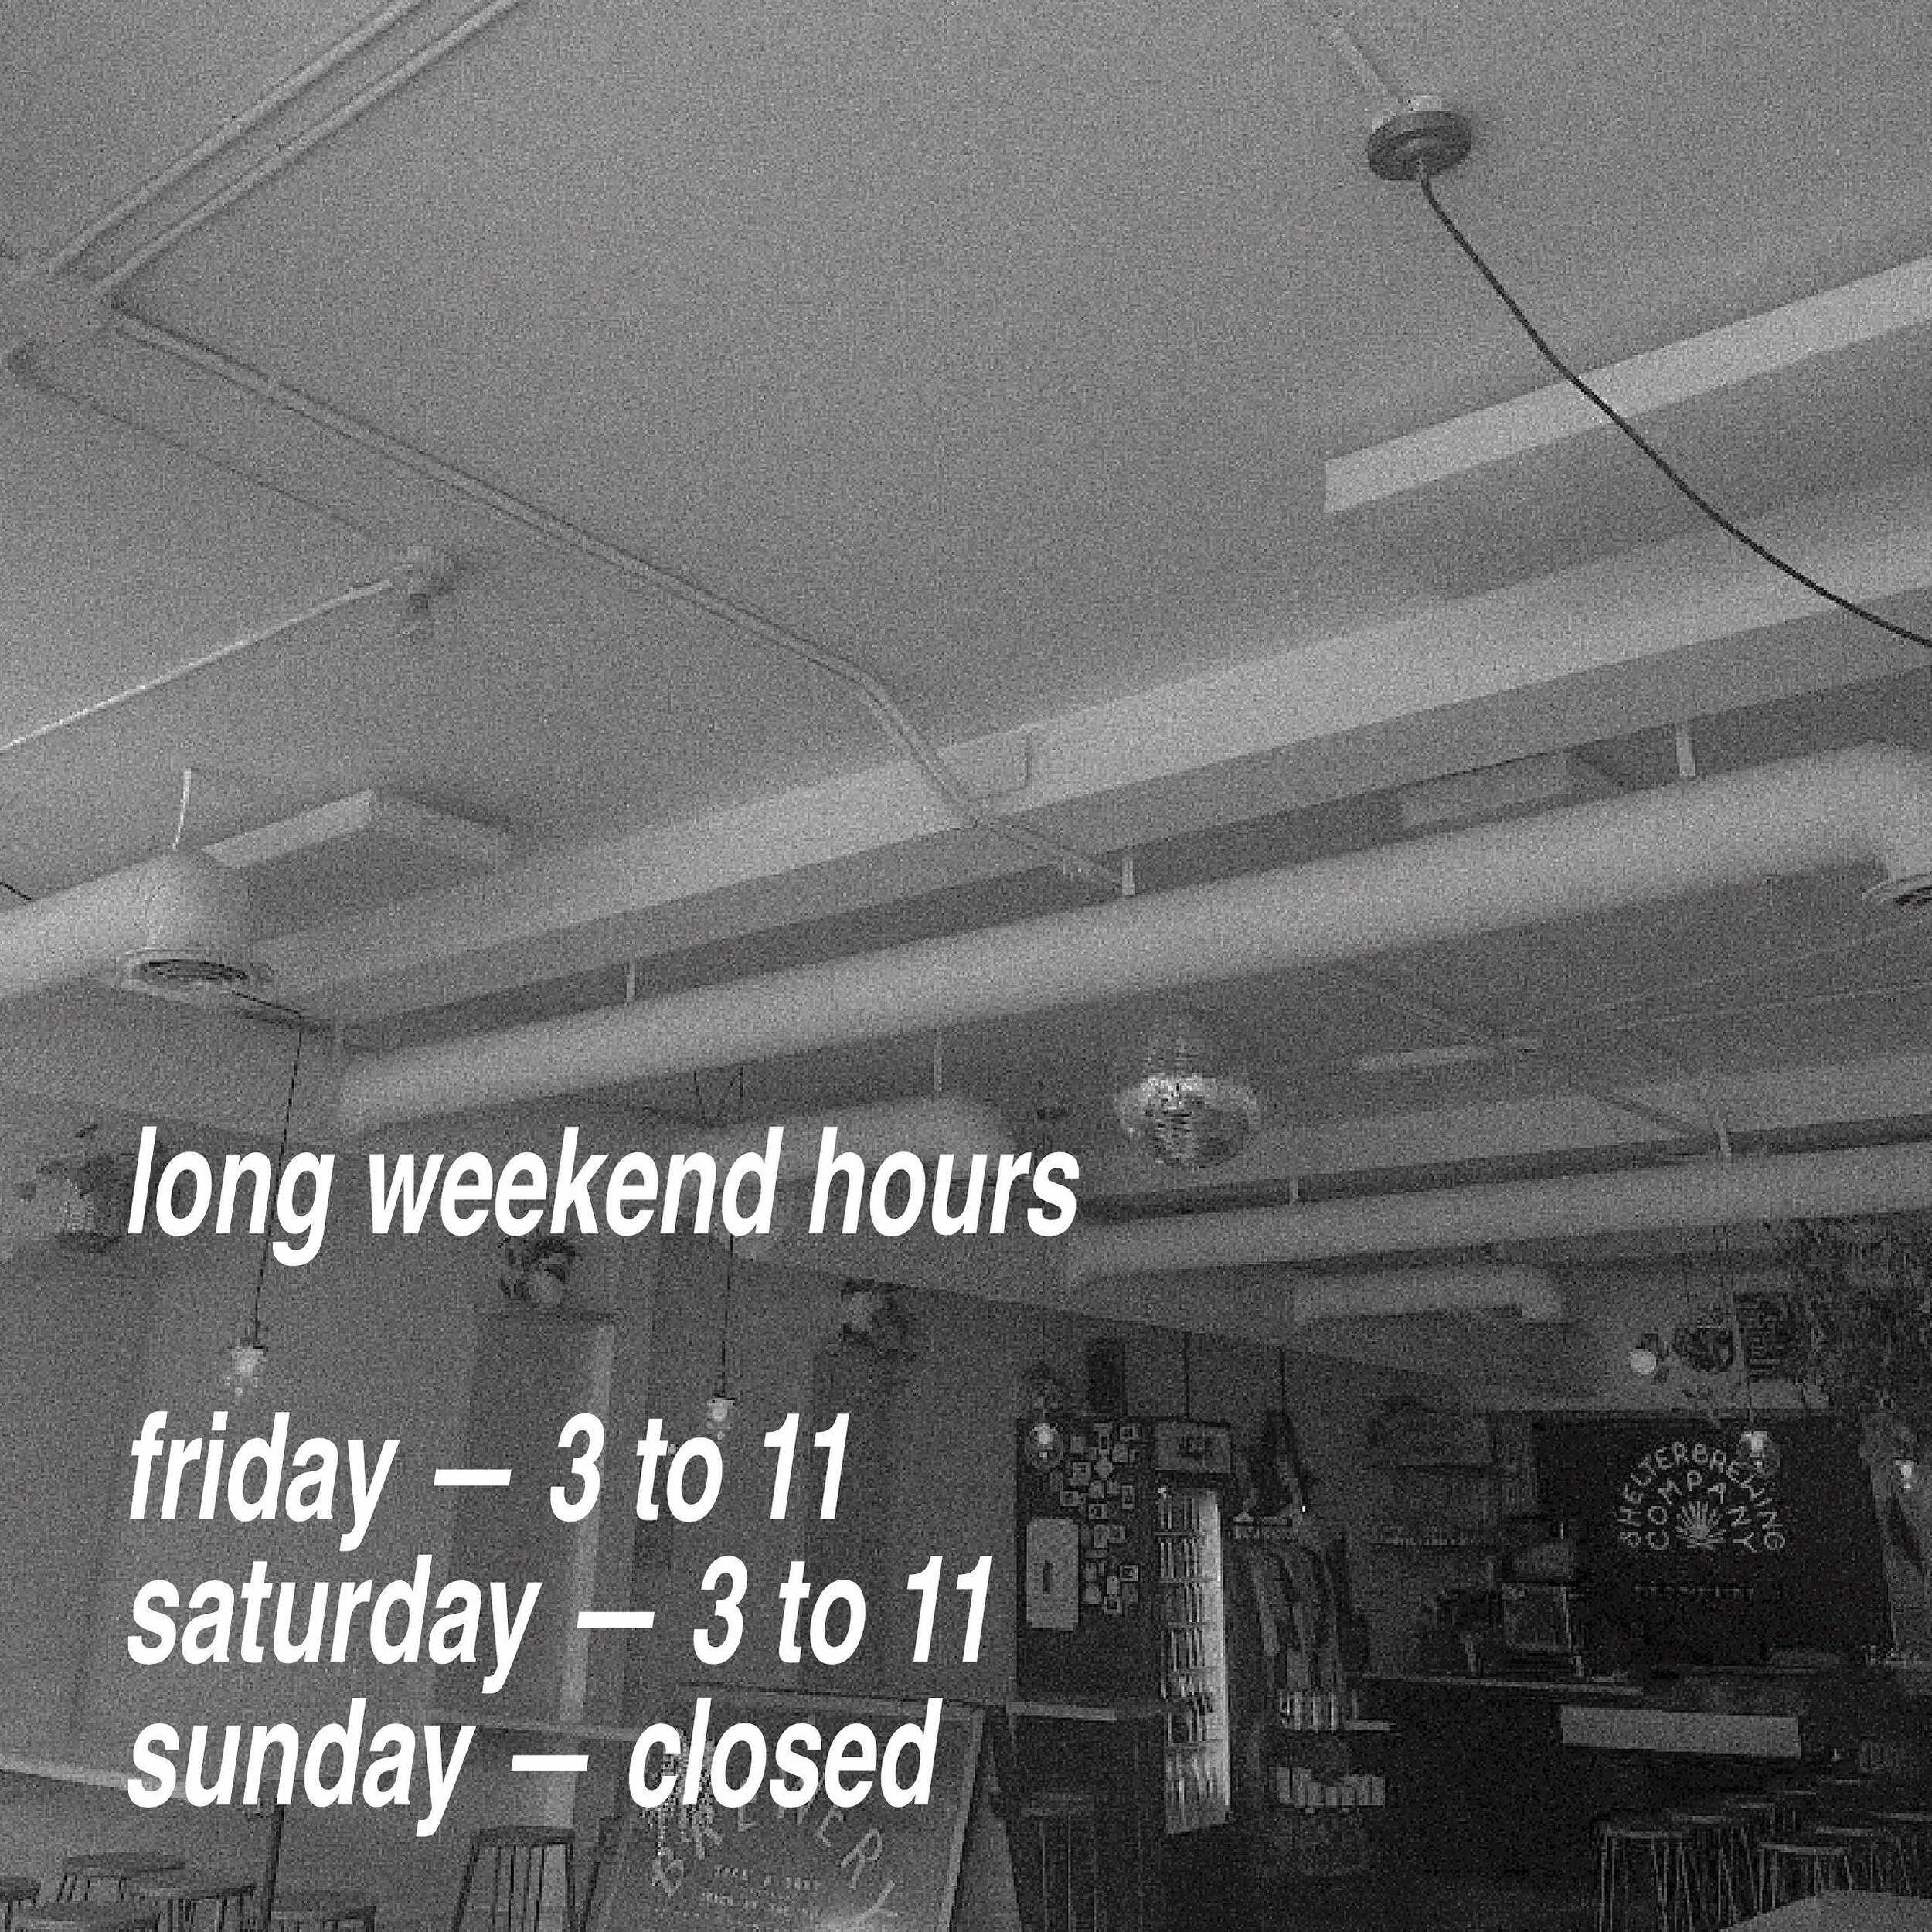 hi !! these are our long weekend hours ! 

open regular hours Friday + Saturday, and closed Sunday for a good lil day off :)

see ya tonight friends!